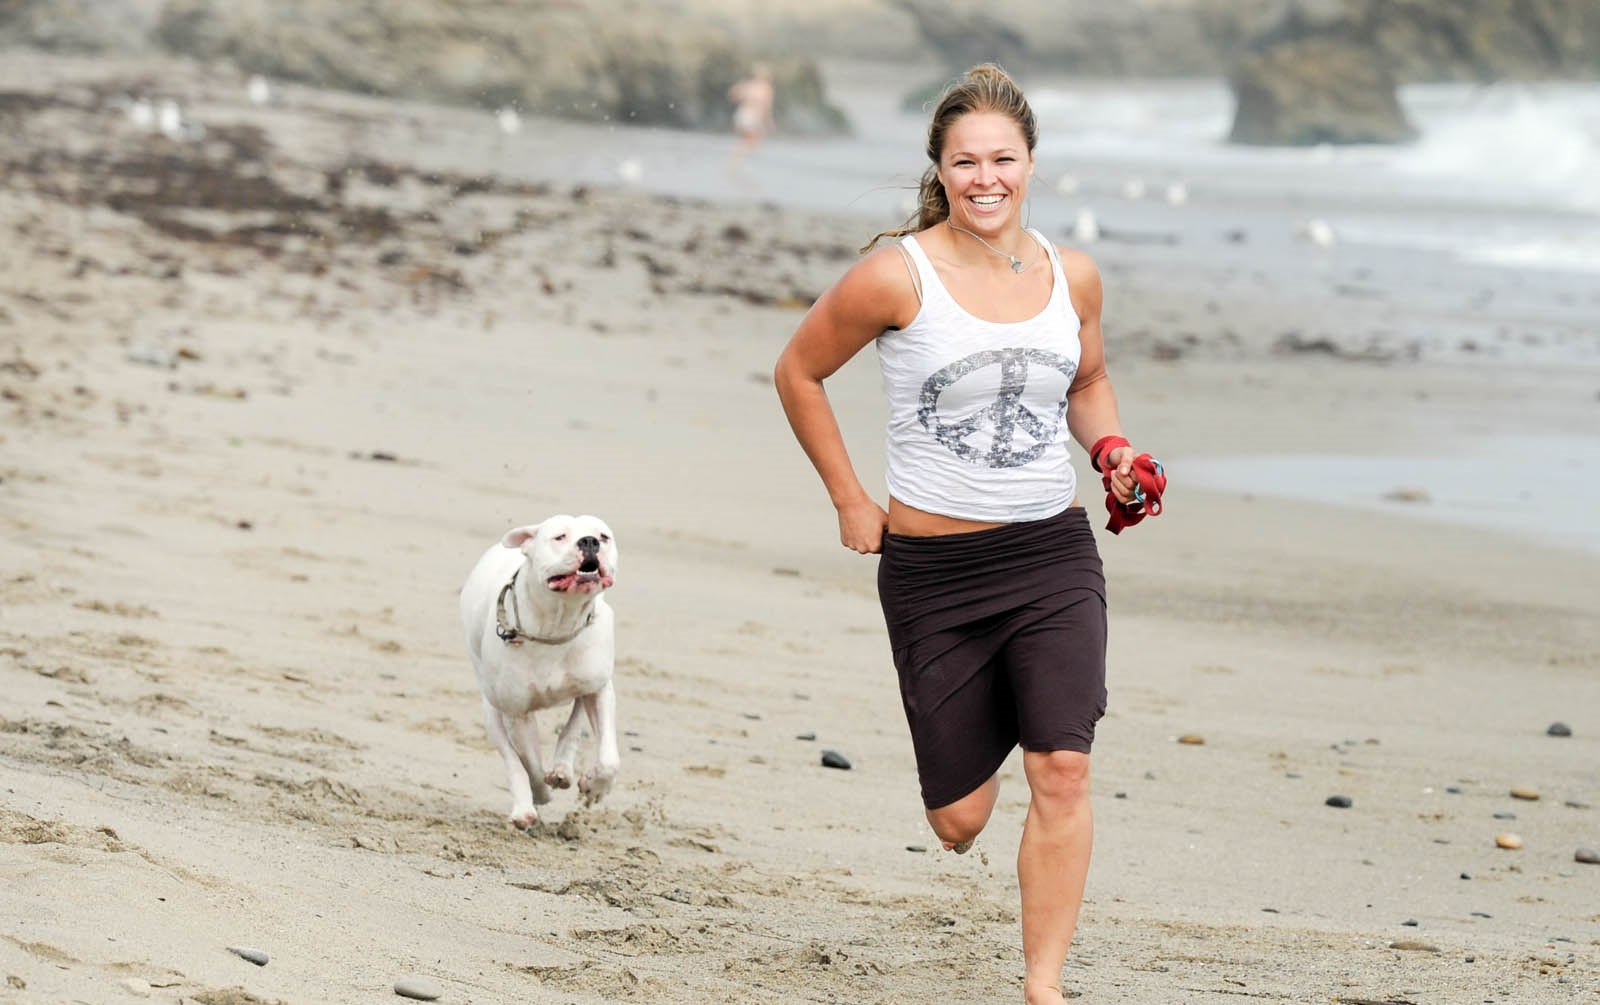 Ronda Rousey and her Dogo Argentino Mochi have some fun at Leo Carrillo State Beach in Malibu, CA. (Hans Gutknecht/Staff Photographer)